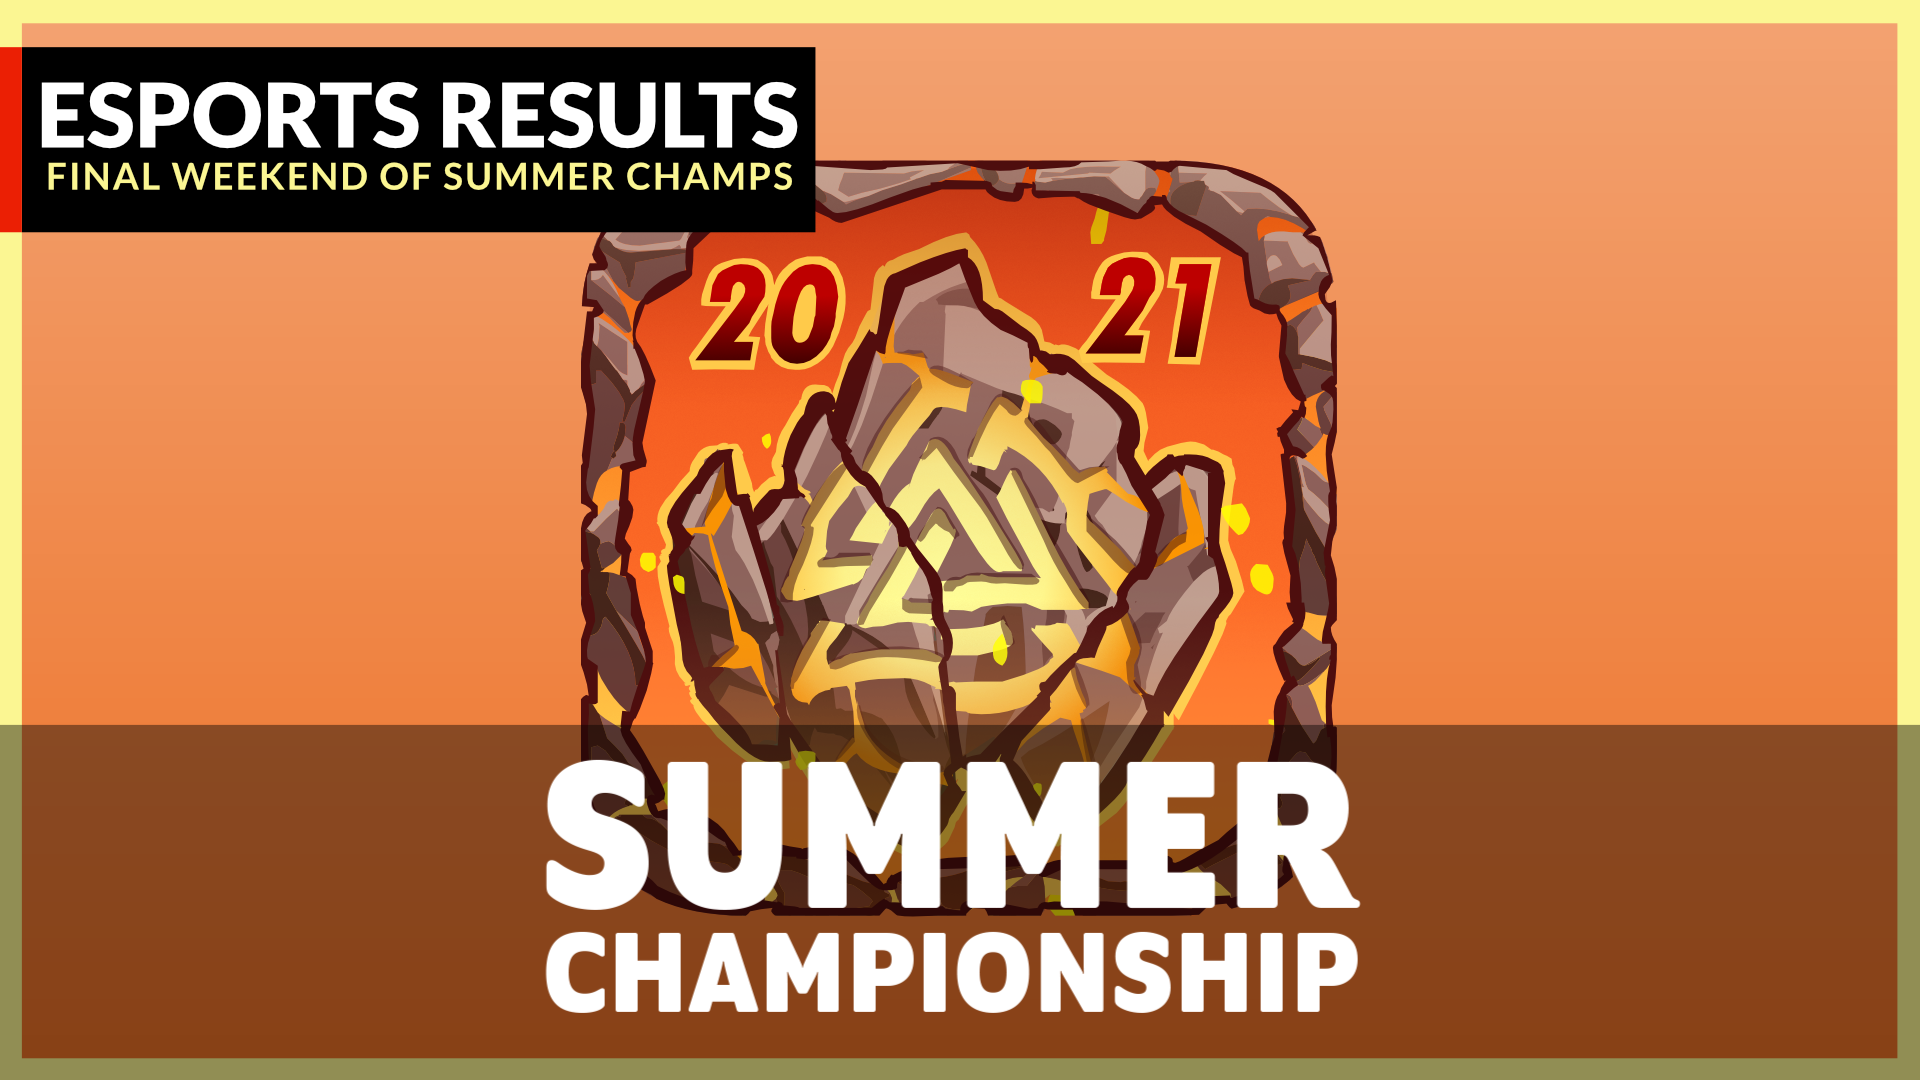 Power Ranger dominates 1v1s and 2v2s in the 2021 South American Summer Championship!